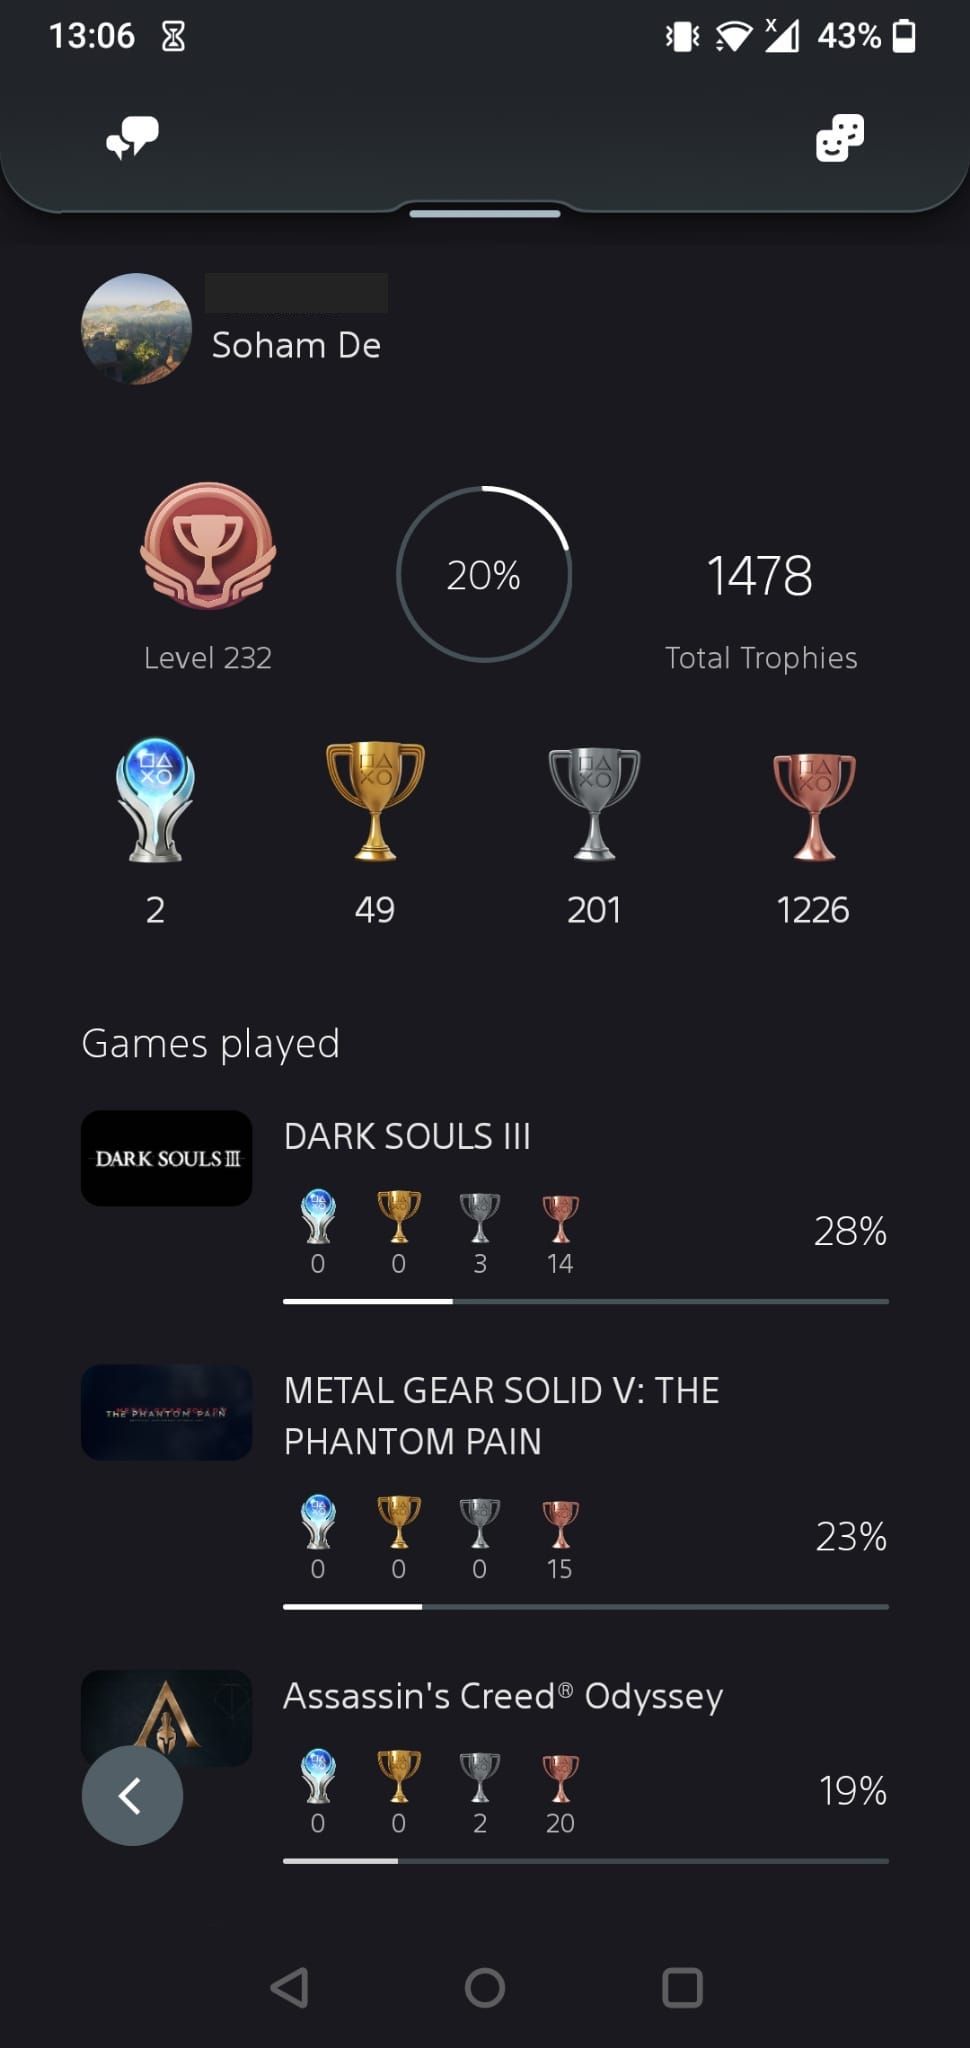 The Trophies section of the PS app